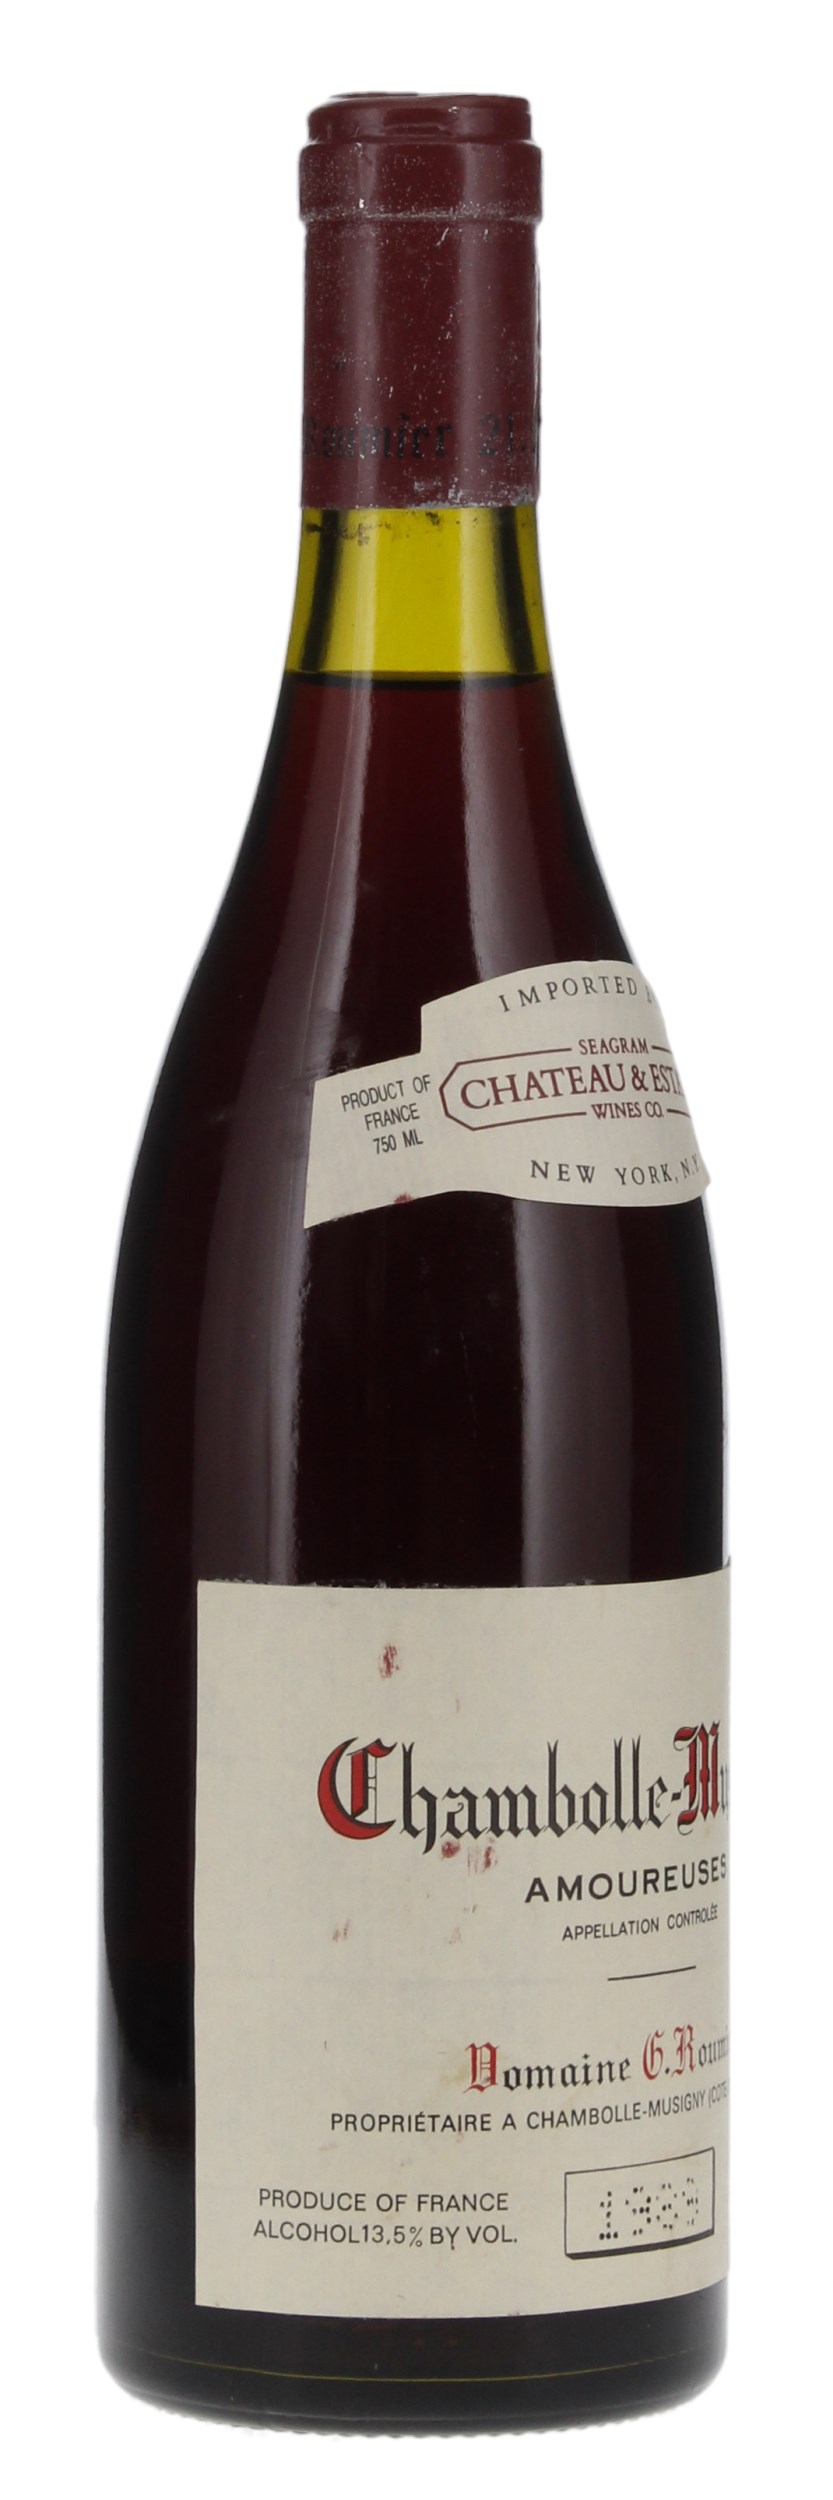 1989 Domaine Georges Roumier Chambolle-Musigny Les Amoureuses, 750ml